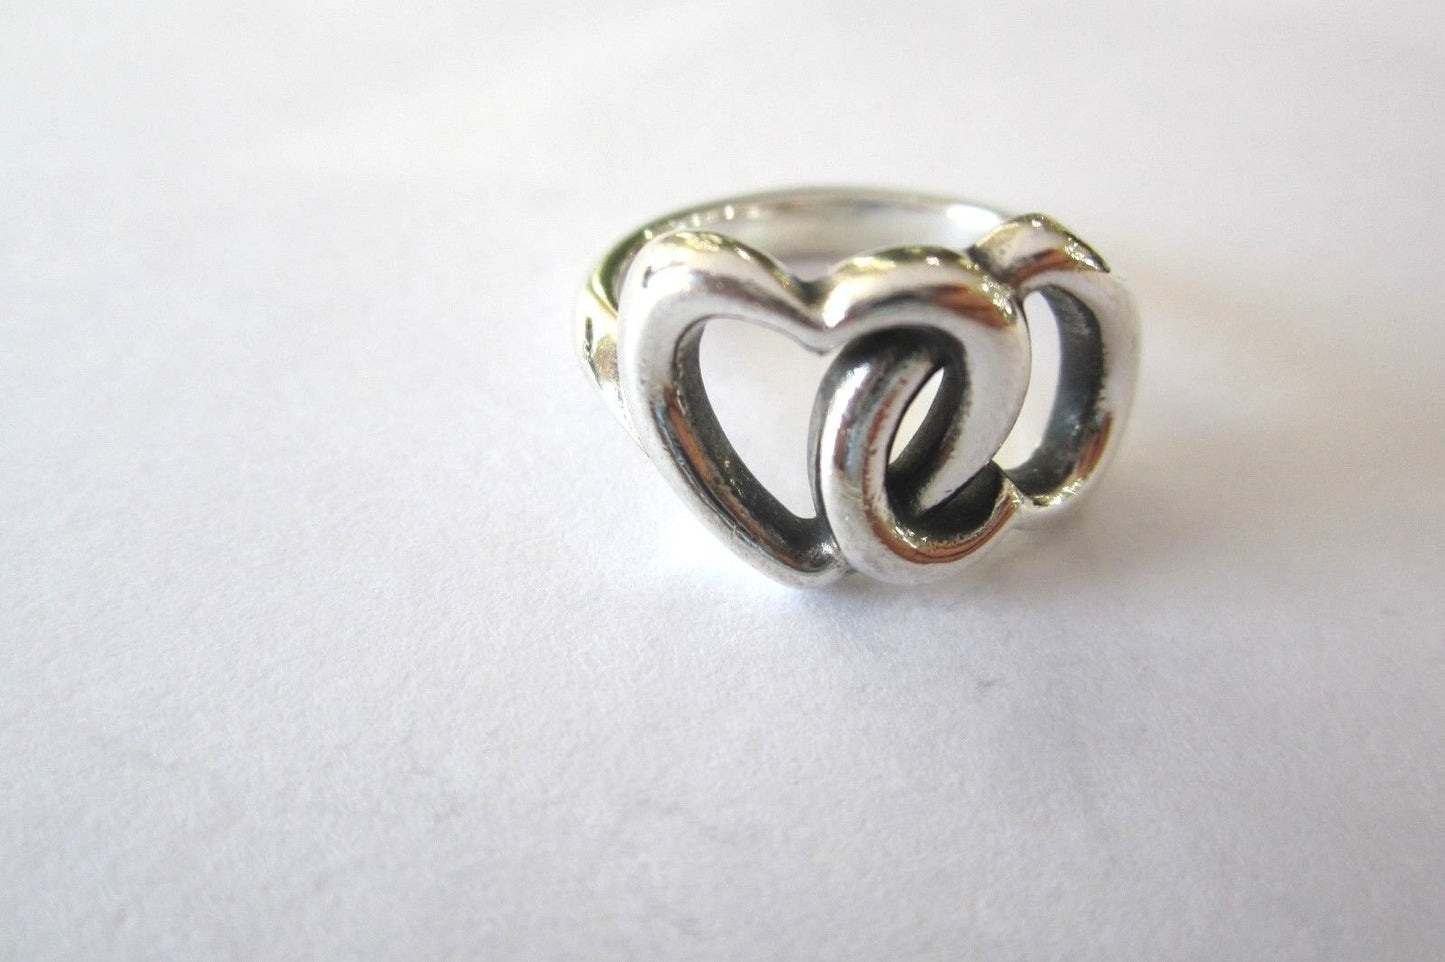 VERY NICE  James Avery Linked Hearts Ring Sz 6.25 Sterling Silver .925